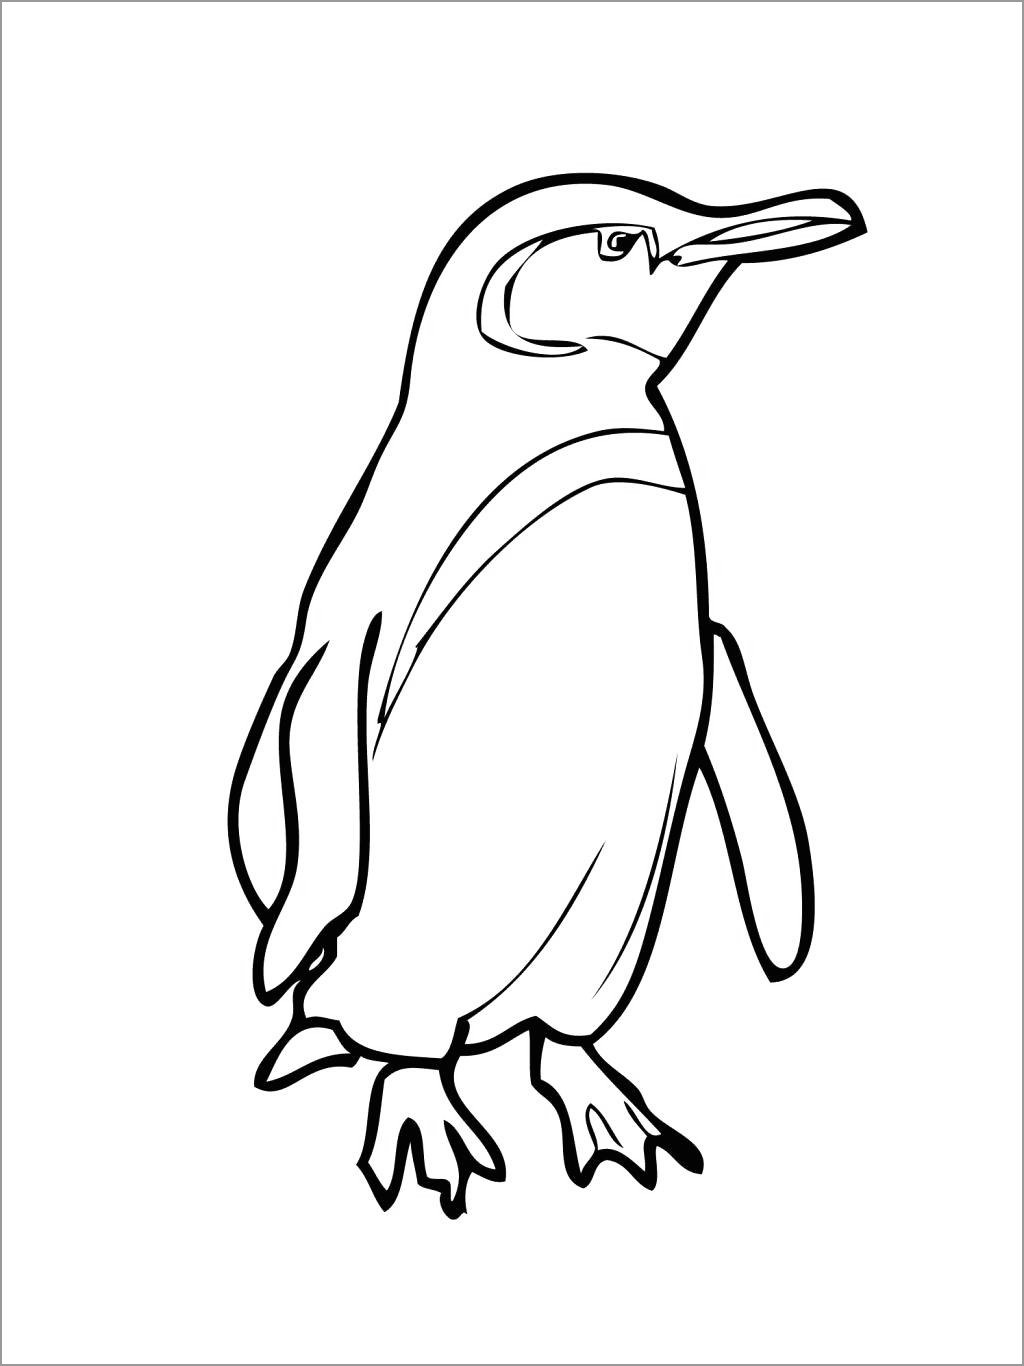 penguin-clip-art-printable-free-free-clipart-images-cliparting